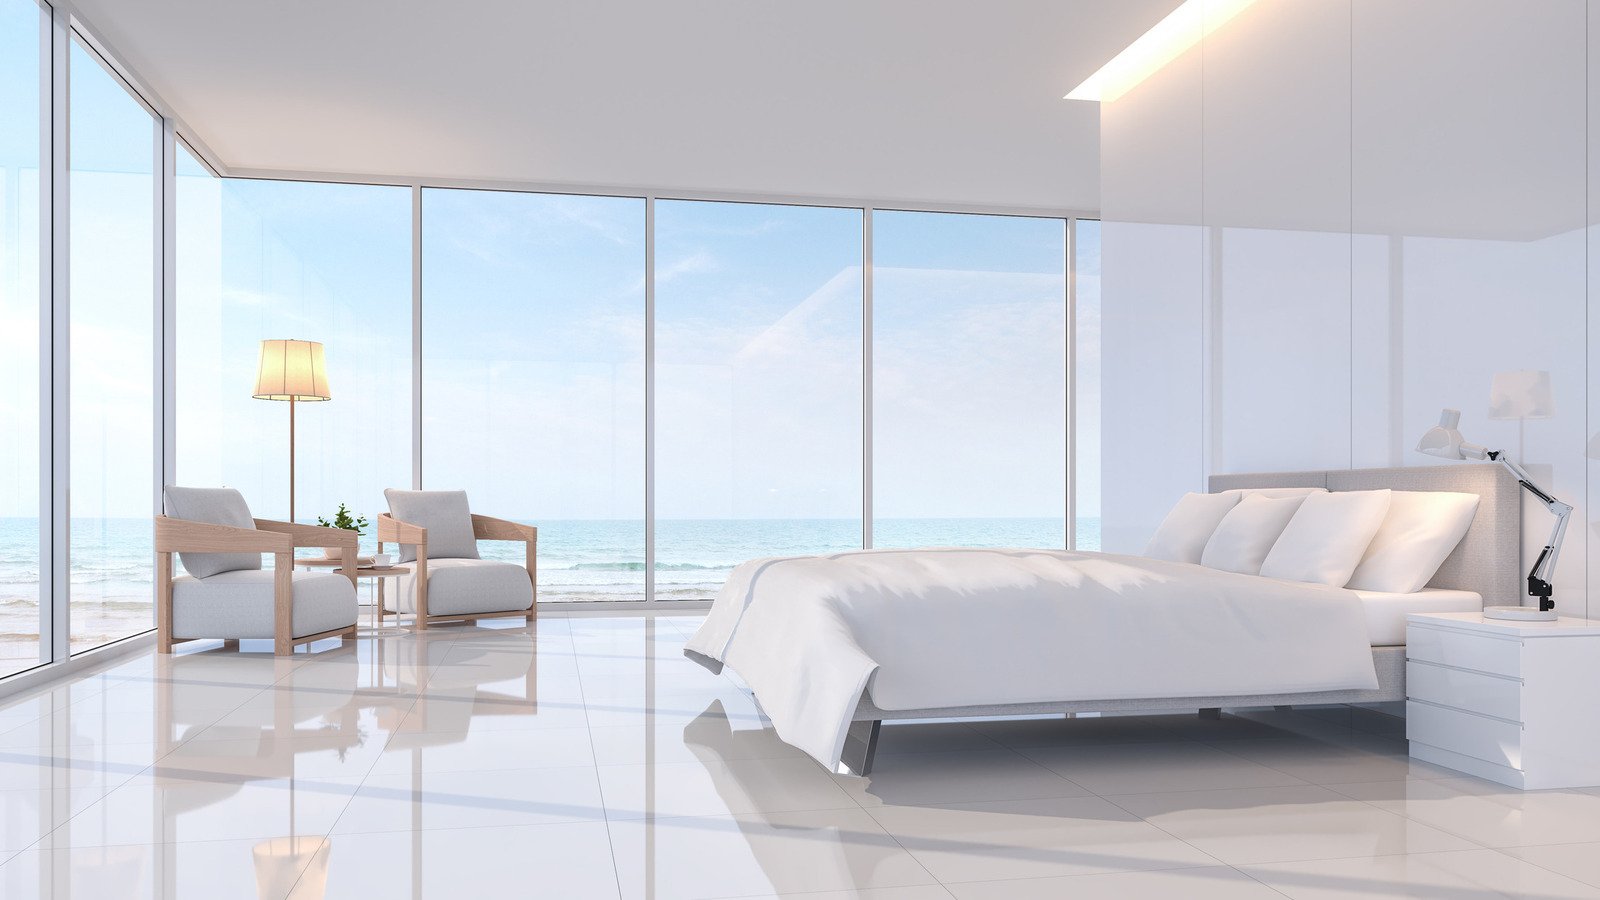 50 Minimalist Bedroom Ideas That Will Help Simplify Your Life